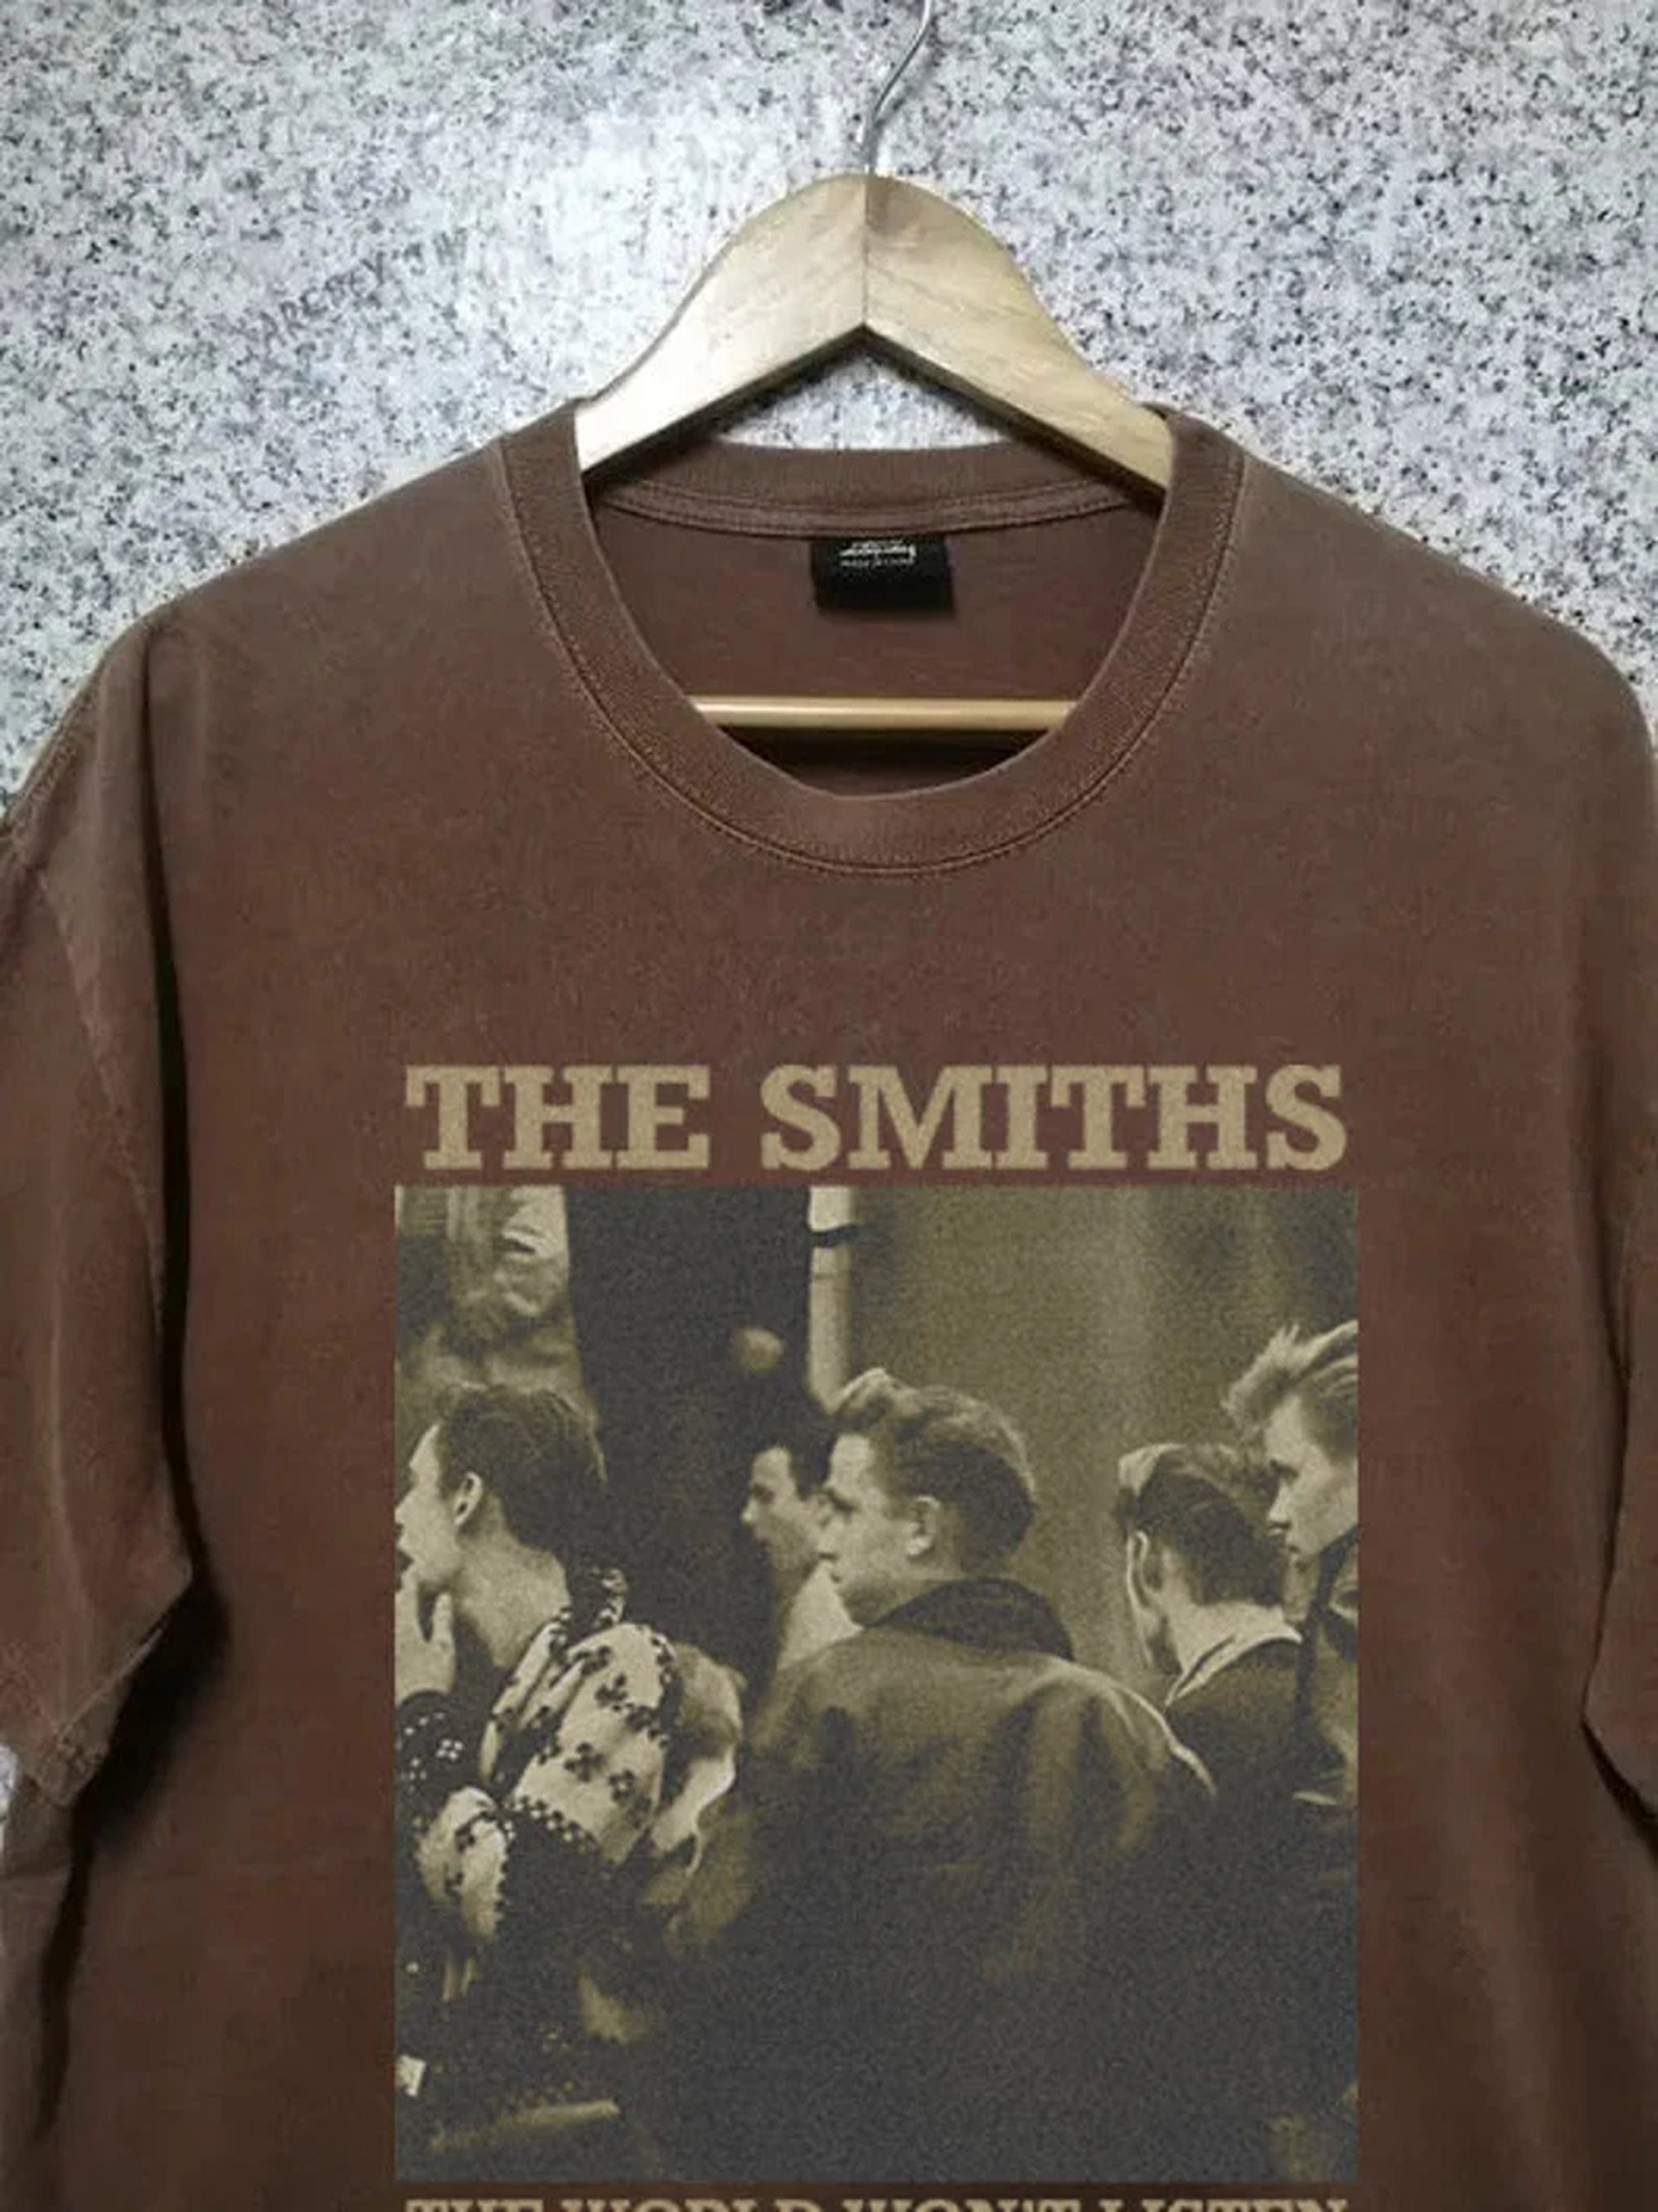 Discover Vintage The Smiths 80s Shirt, The Smiths T-Shirt, Vintage The Smiths Shirt,